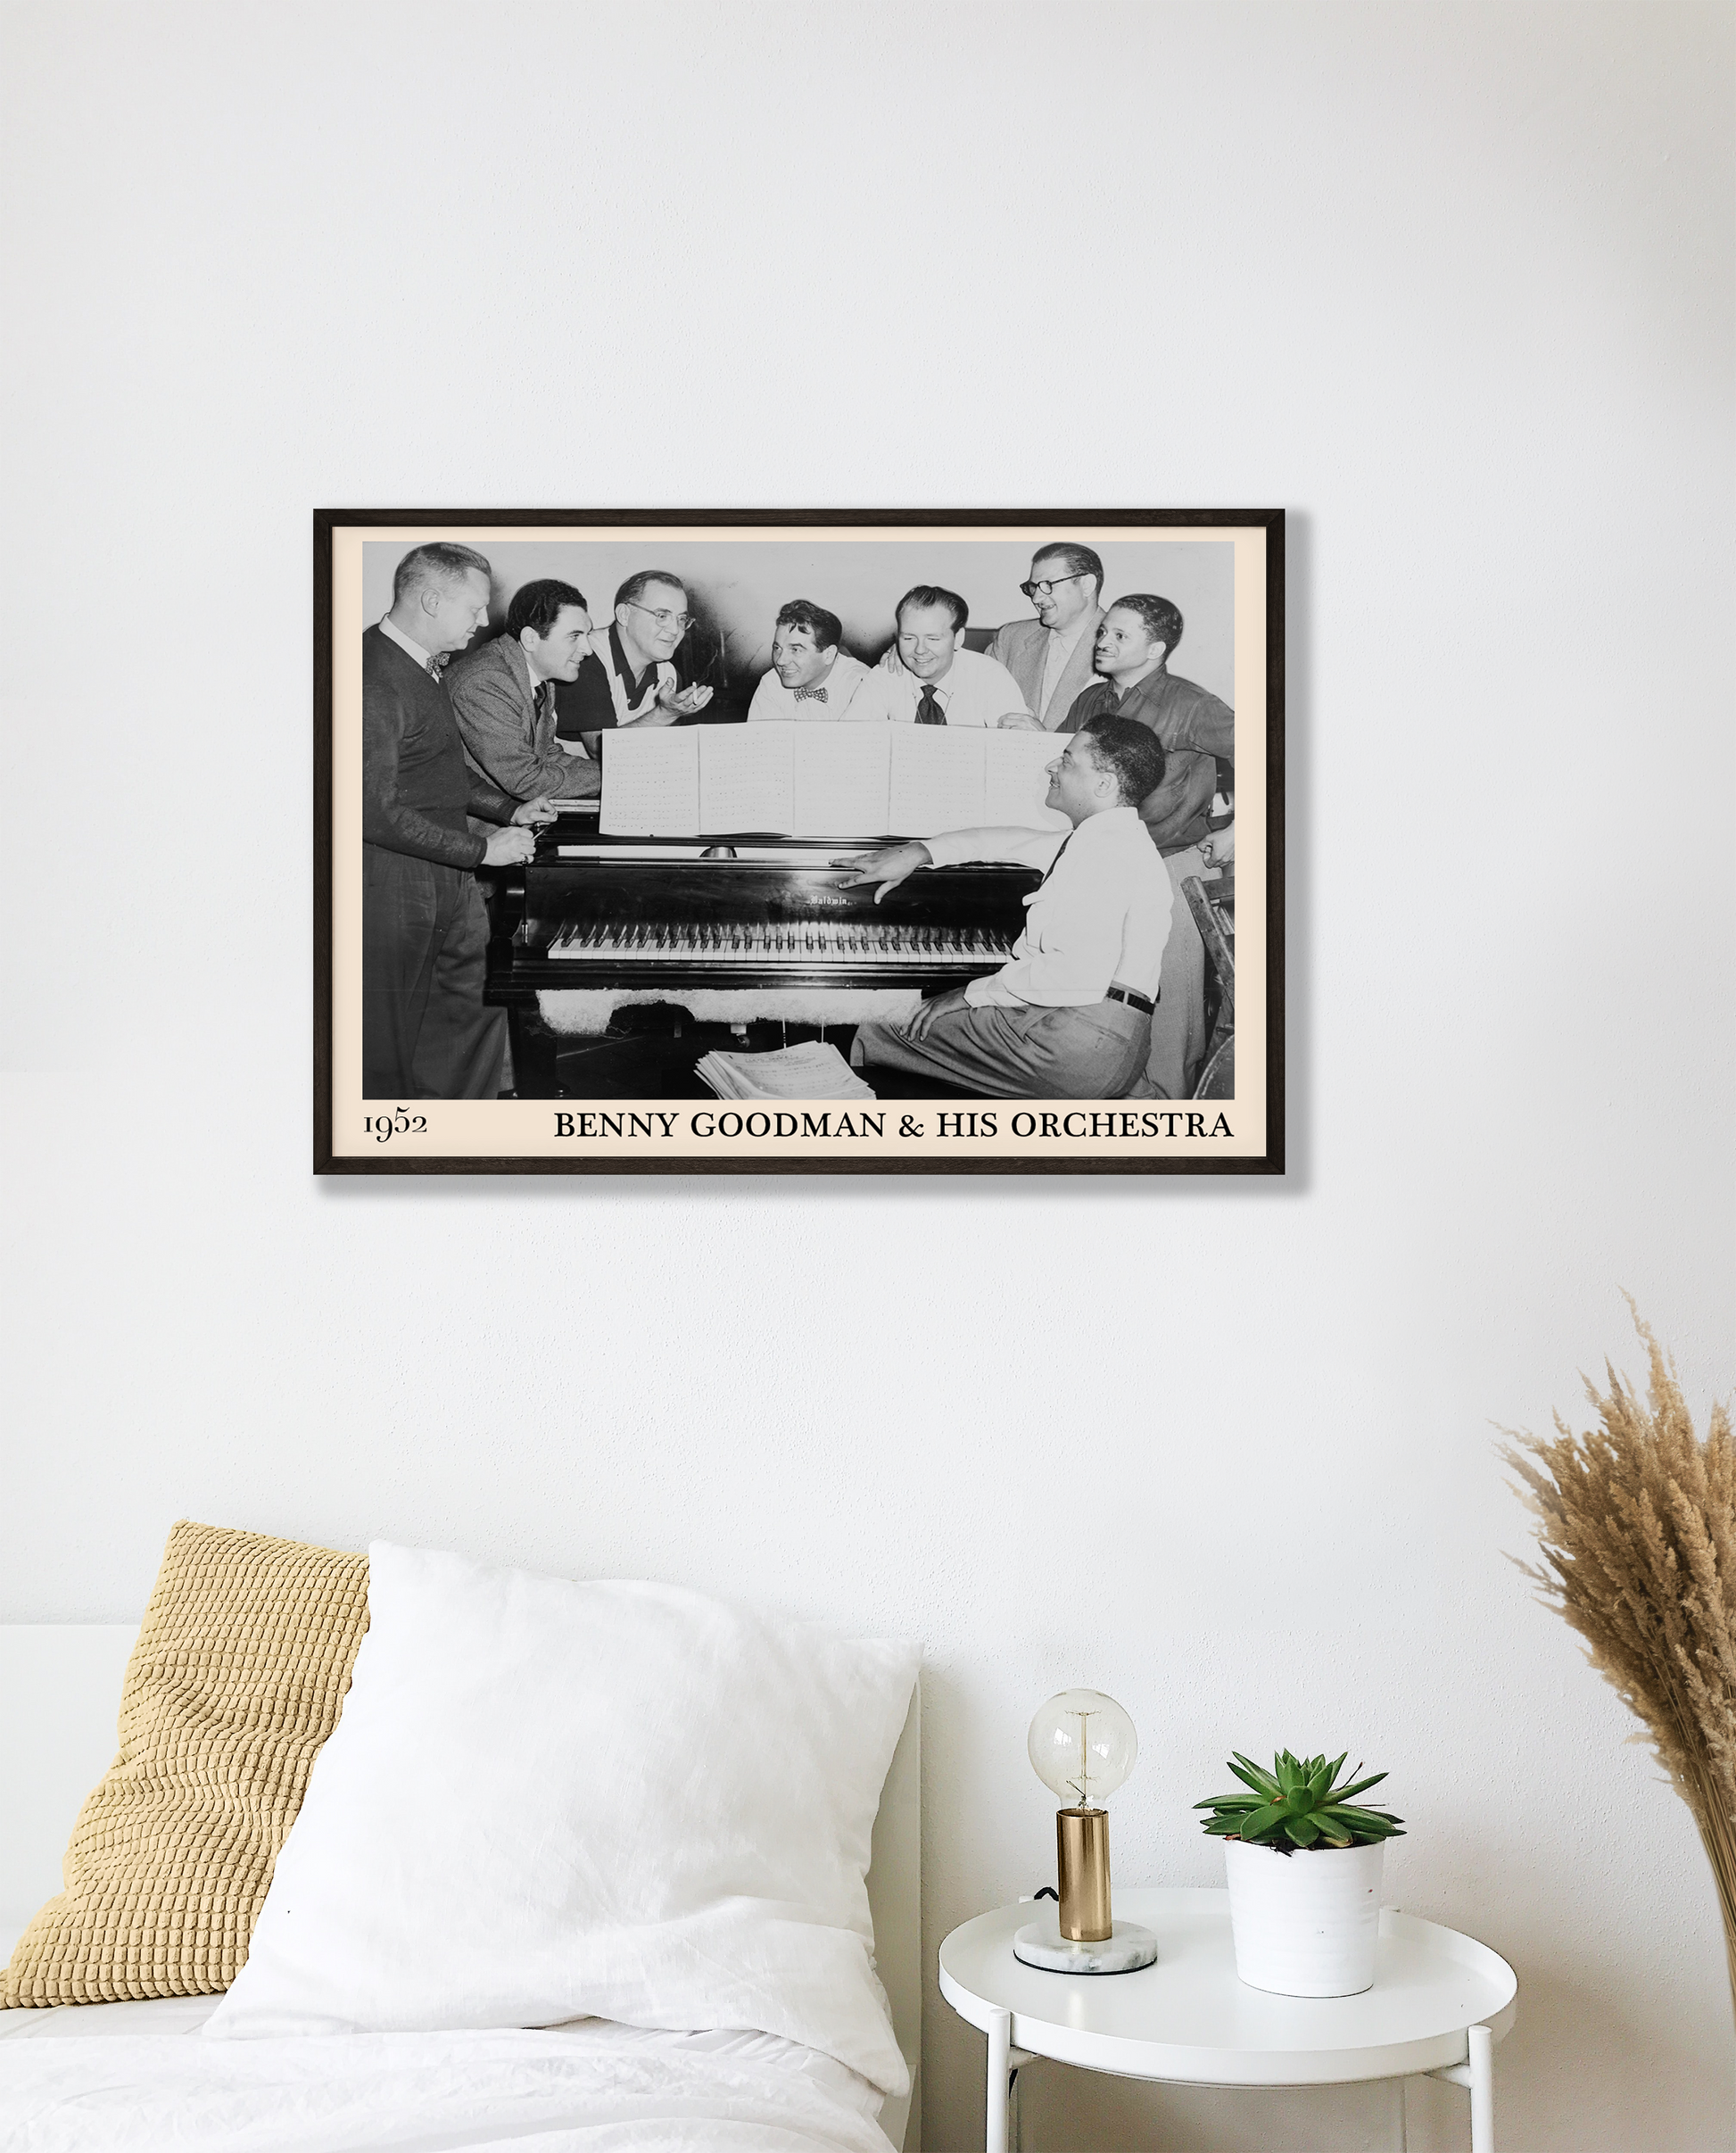 1952 photograph of Benny Goodman & his orchestra crafted into a cool black framed jazz print. The poster is hanging on a white living bedroom wall.